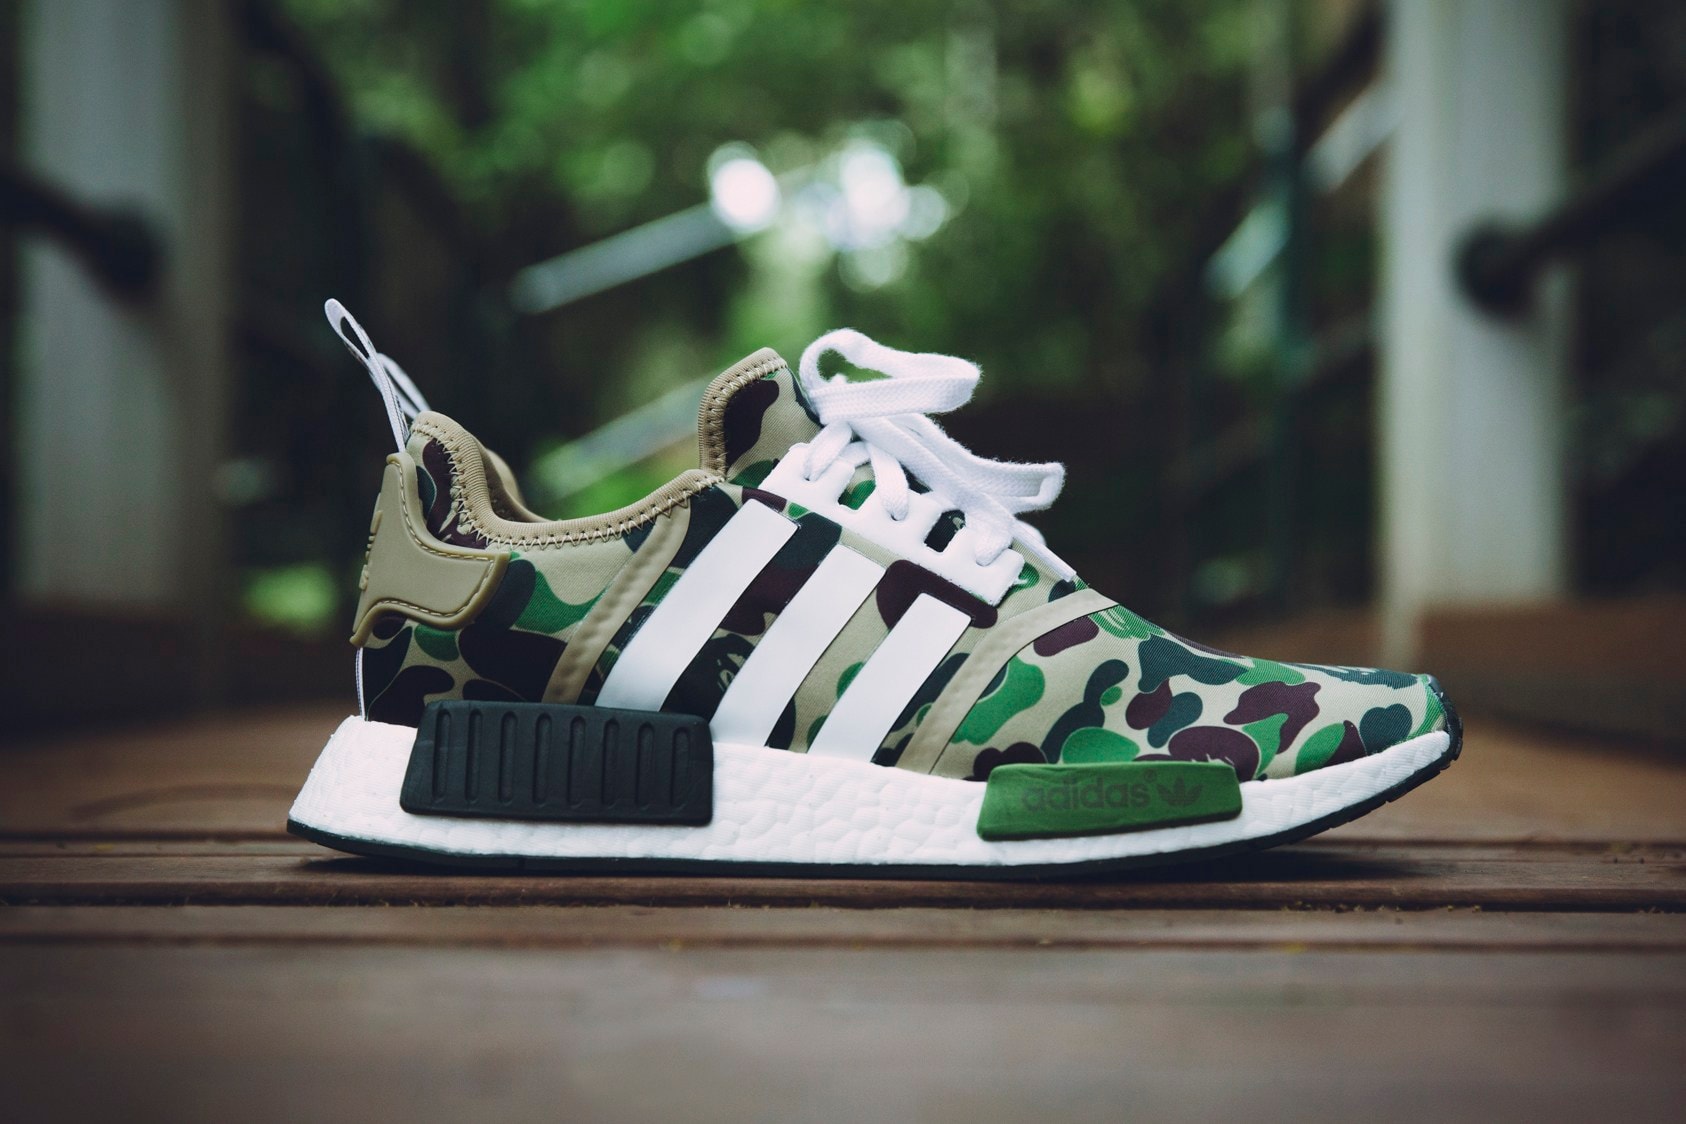 Official Store Links for the BAPE x adidas Originals NMD Re-Release Western Europe A Bathing Ape Three Stripes Germany